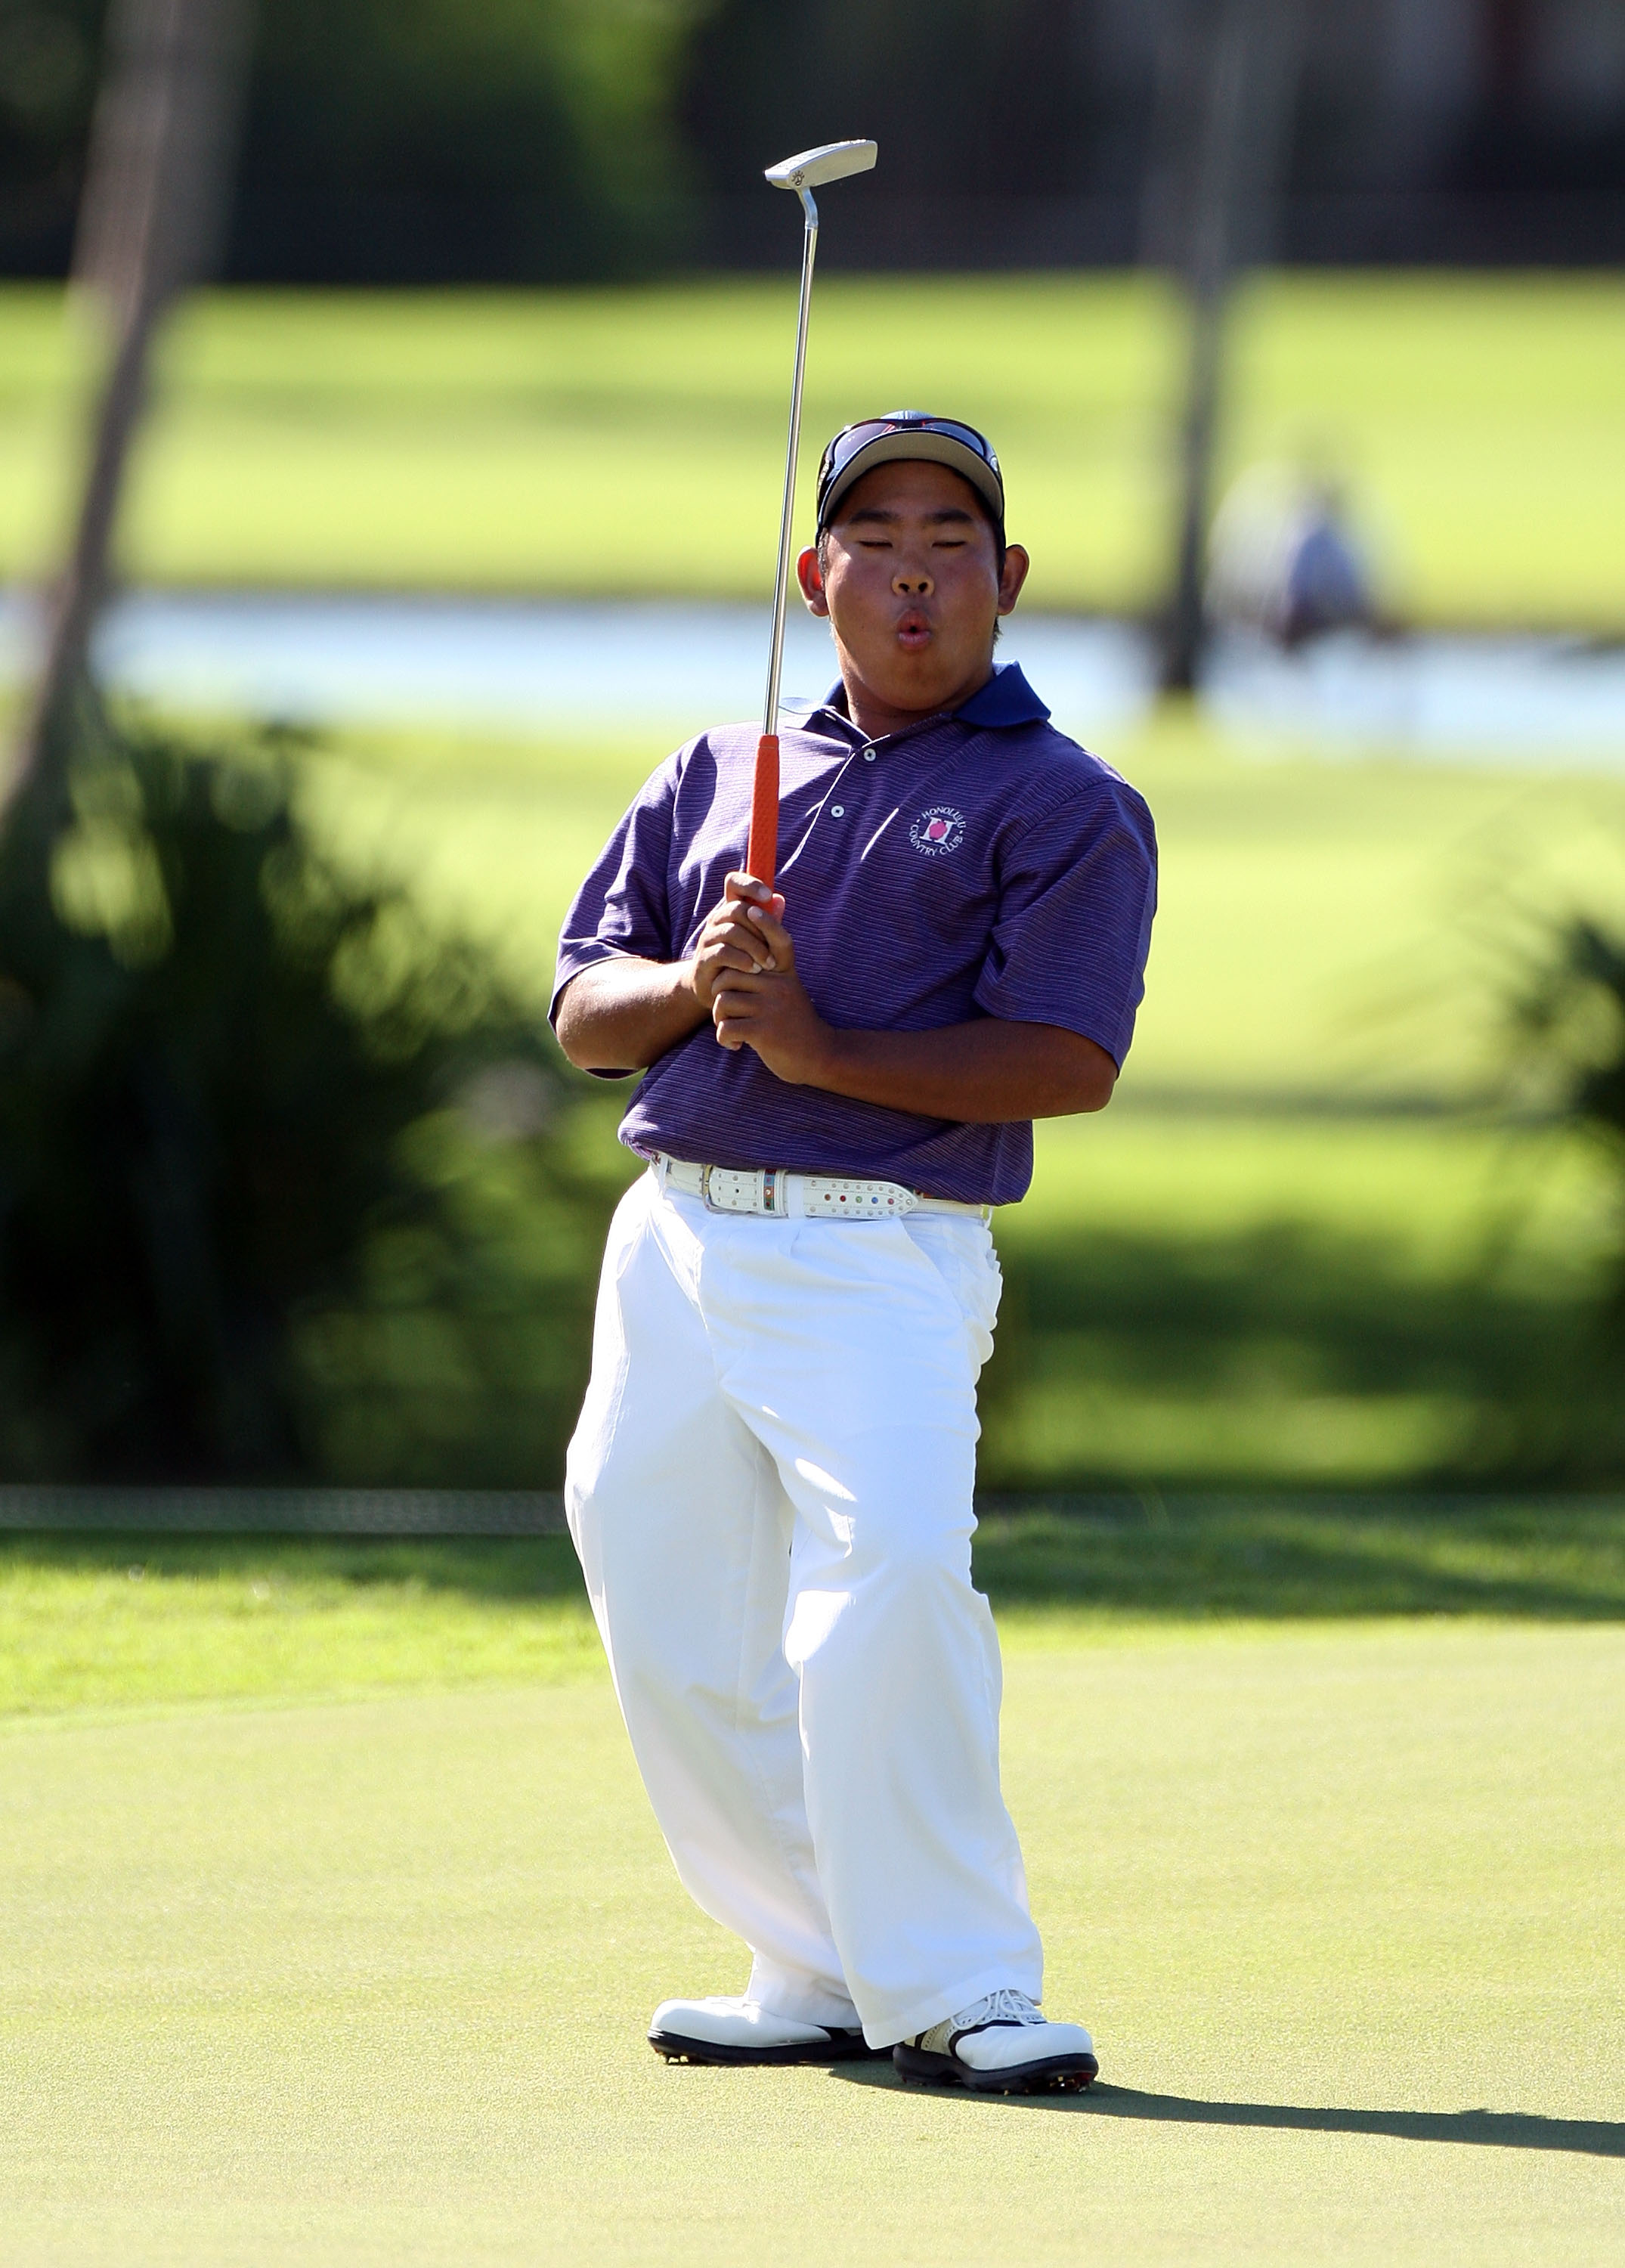 HONOLULU - JANUARY 17:  Tadd Fujikawa reacts to a missed birdie putt on the 14th hole during the third round of the Sony Open at Waialae Country Club on January 17, 2009 in Honolulu, Hawaii.  (Photo by Sam Greenwood/Getty Images)